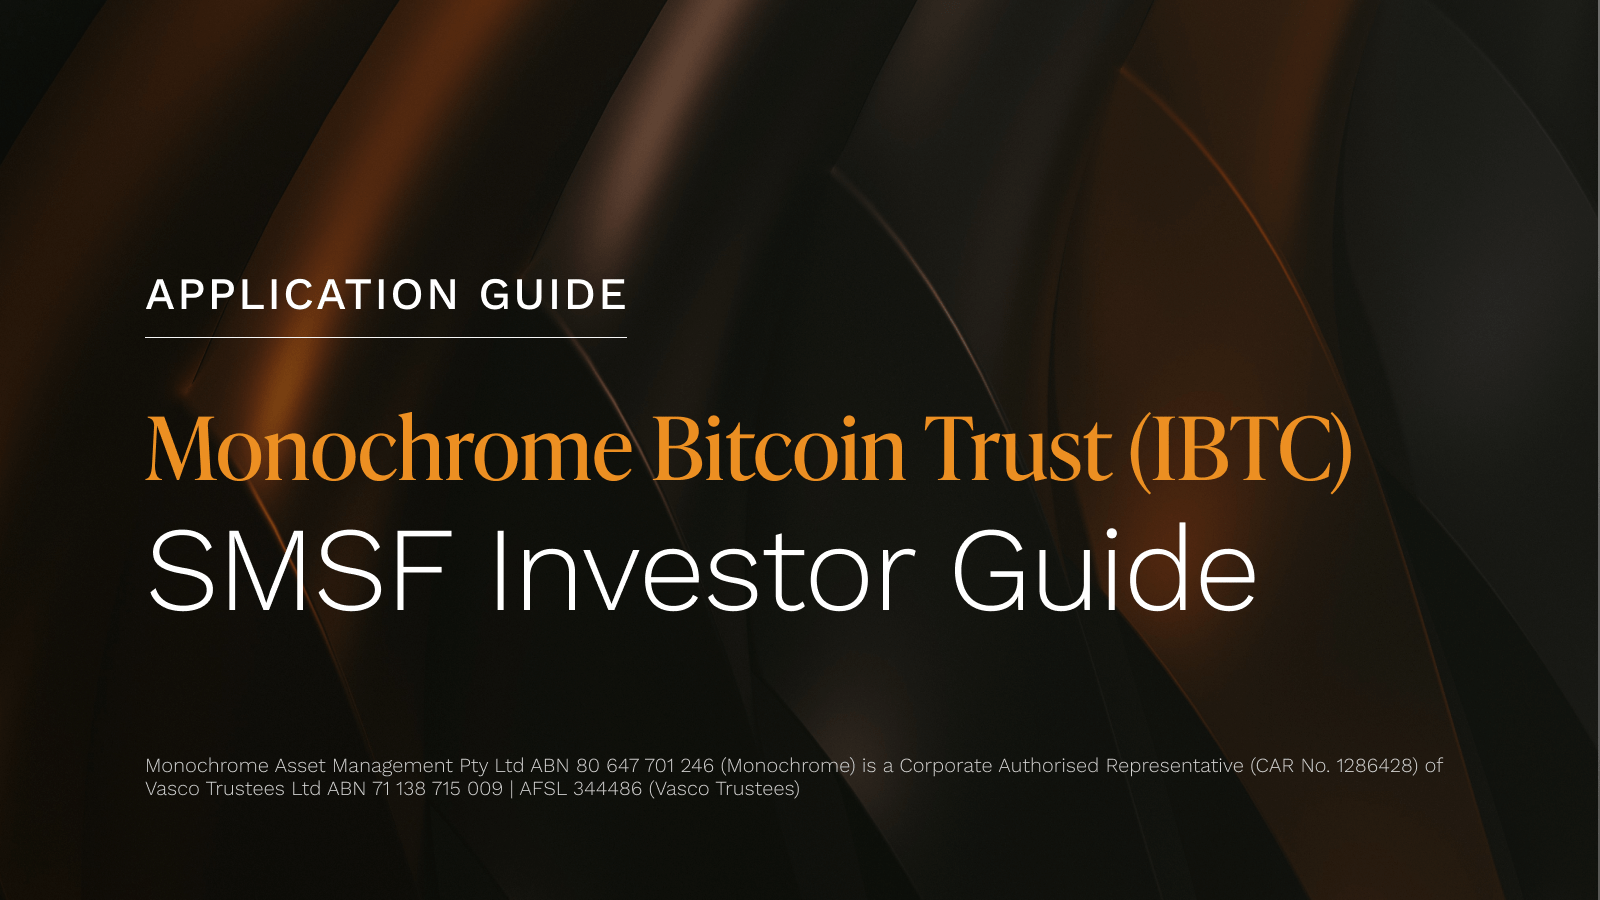 SMSF Investor Guide_Monochrome Bitcoin Trust (IBTC)-Application Guide.png